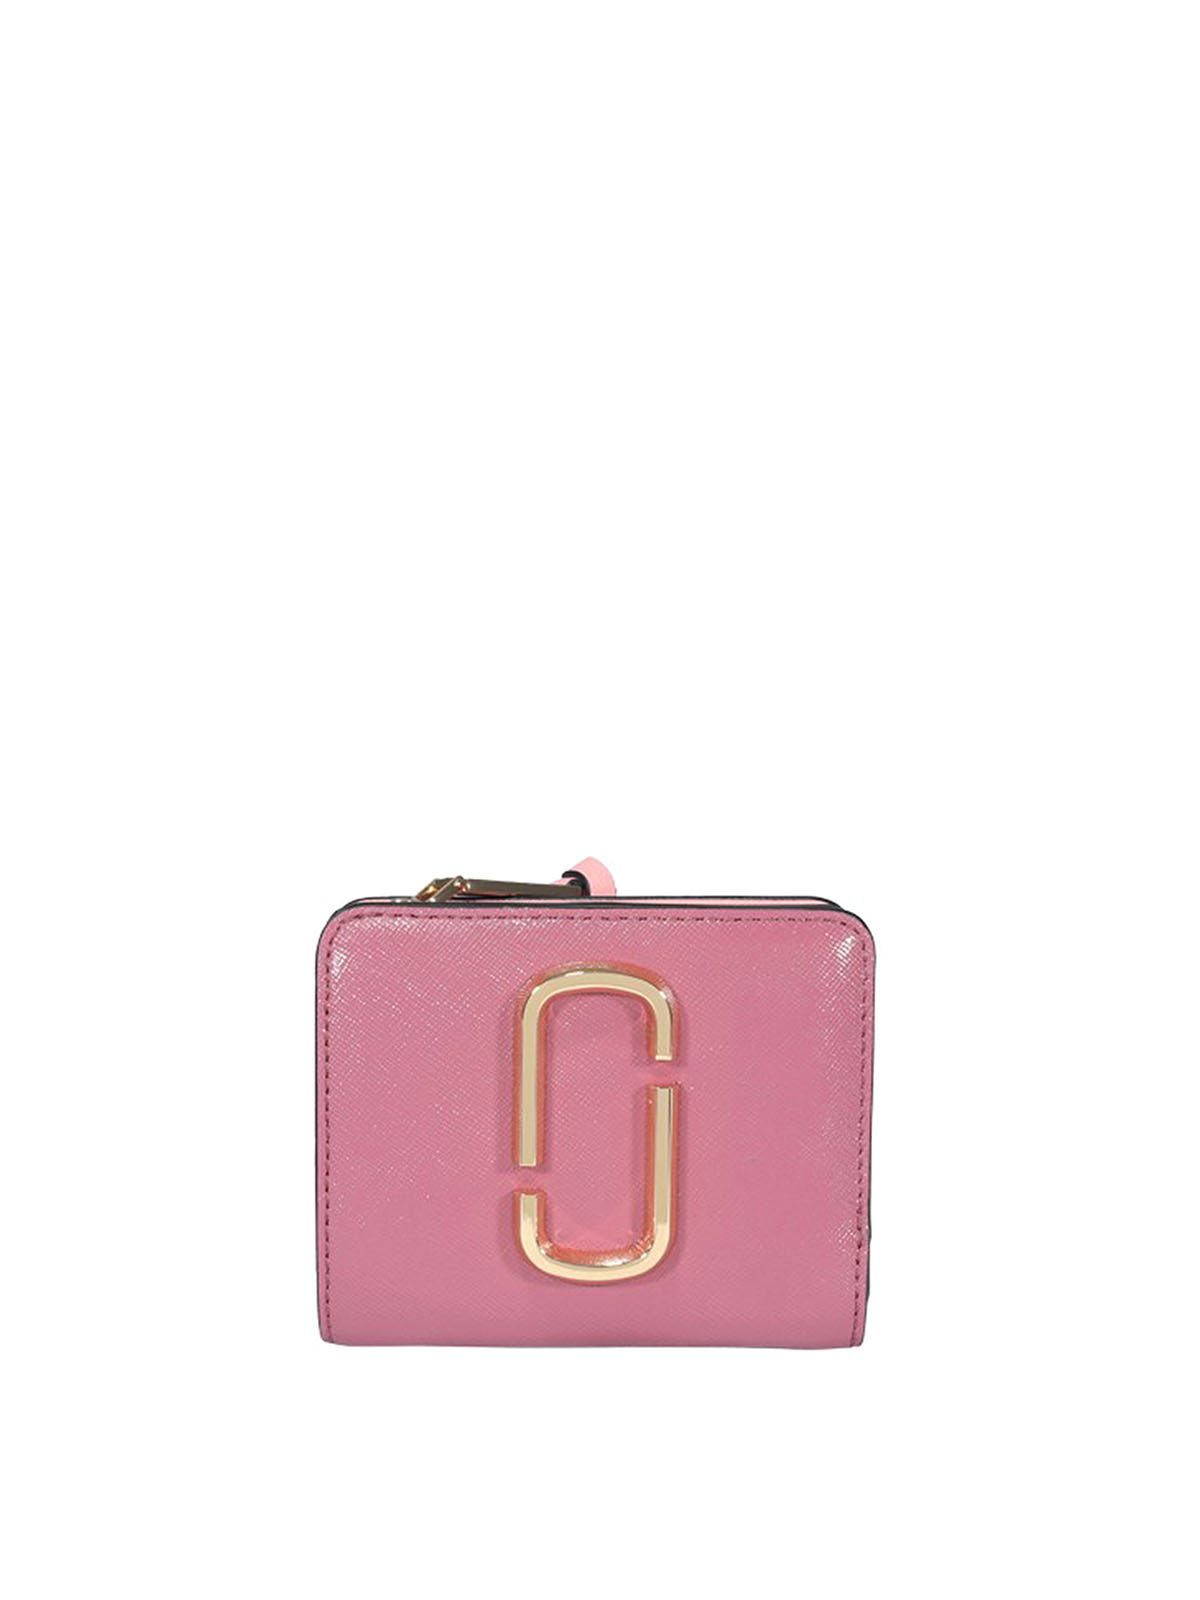 The snapshot mini compact leather wallet by Marc Jacobs